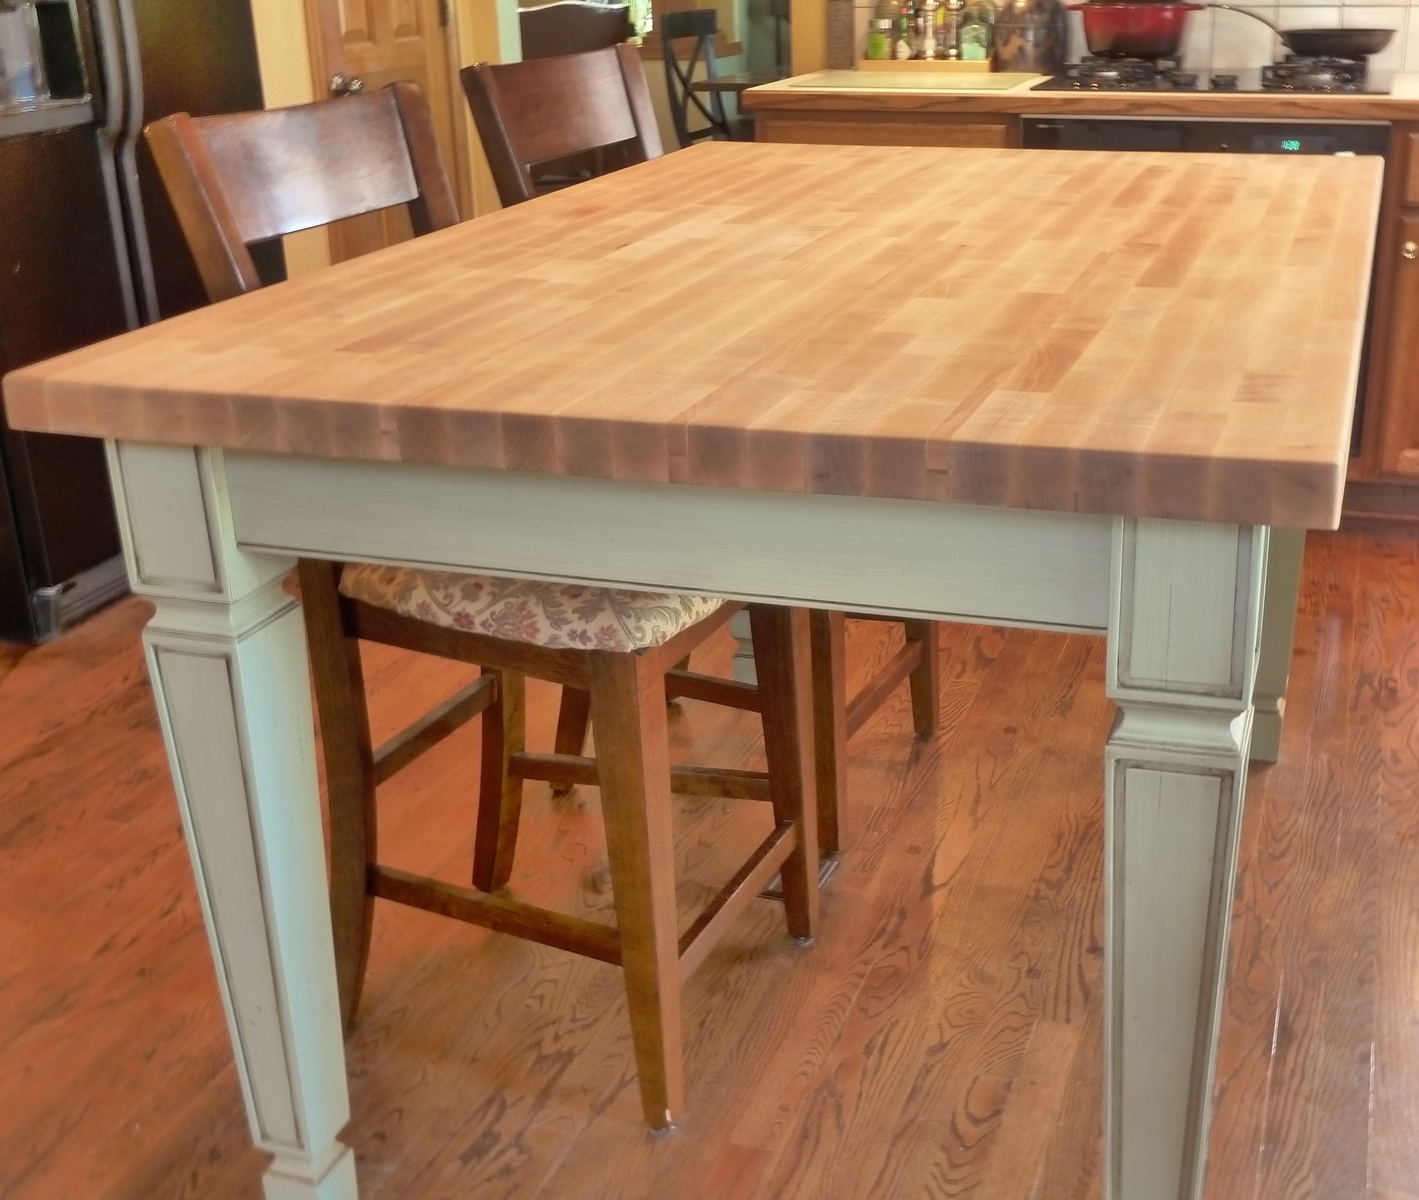 Butcher Block Table to Match with Your Laminate Flooring | WHomeStudio